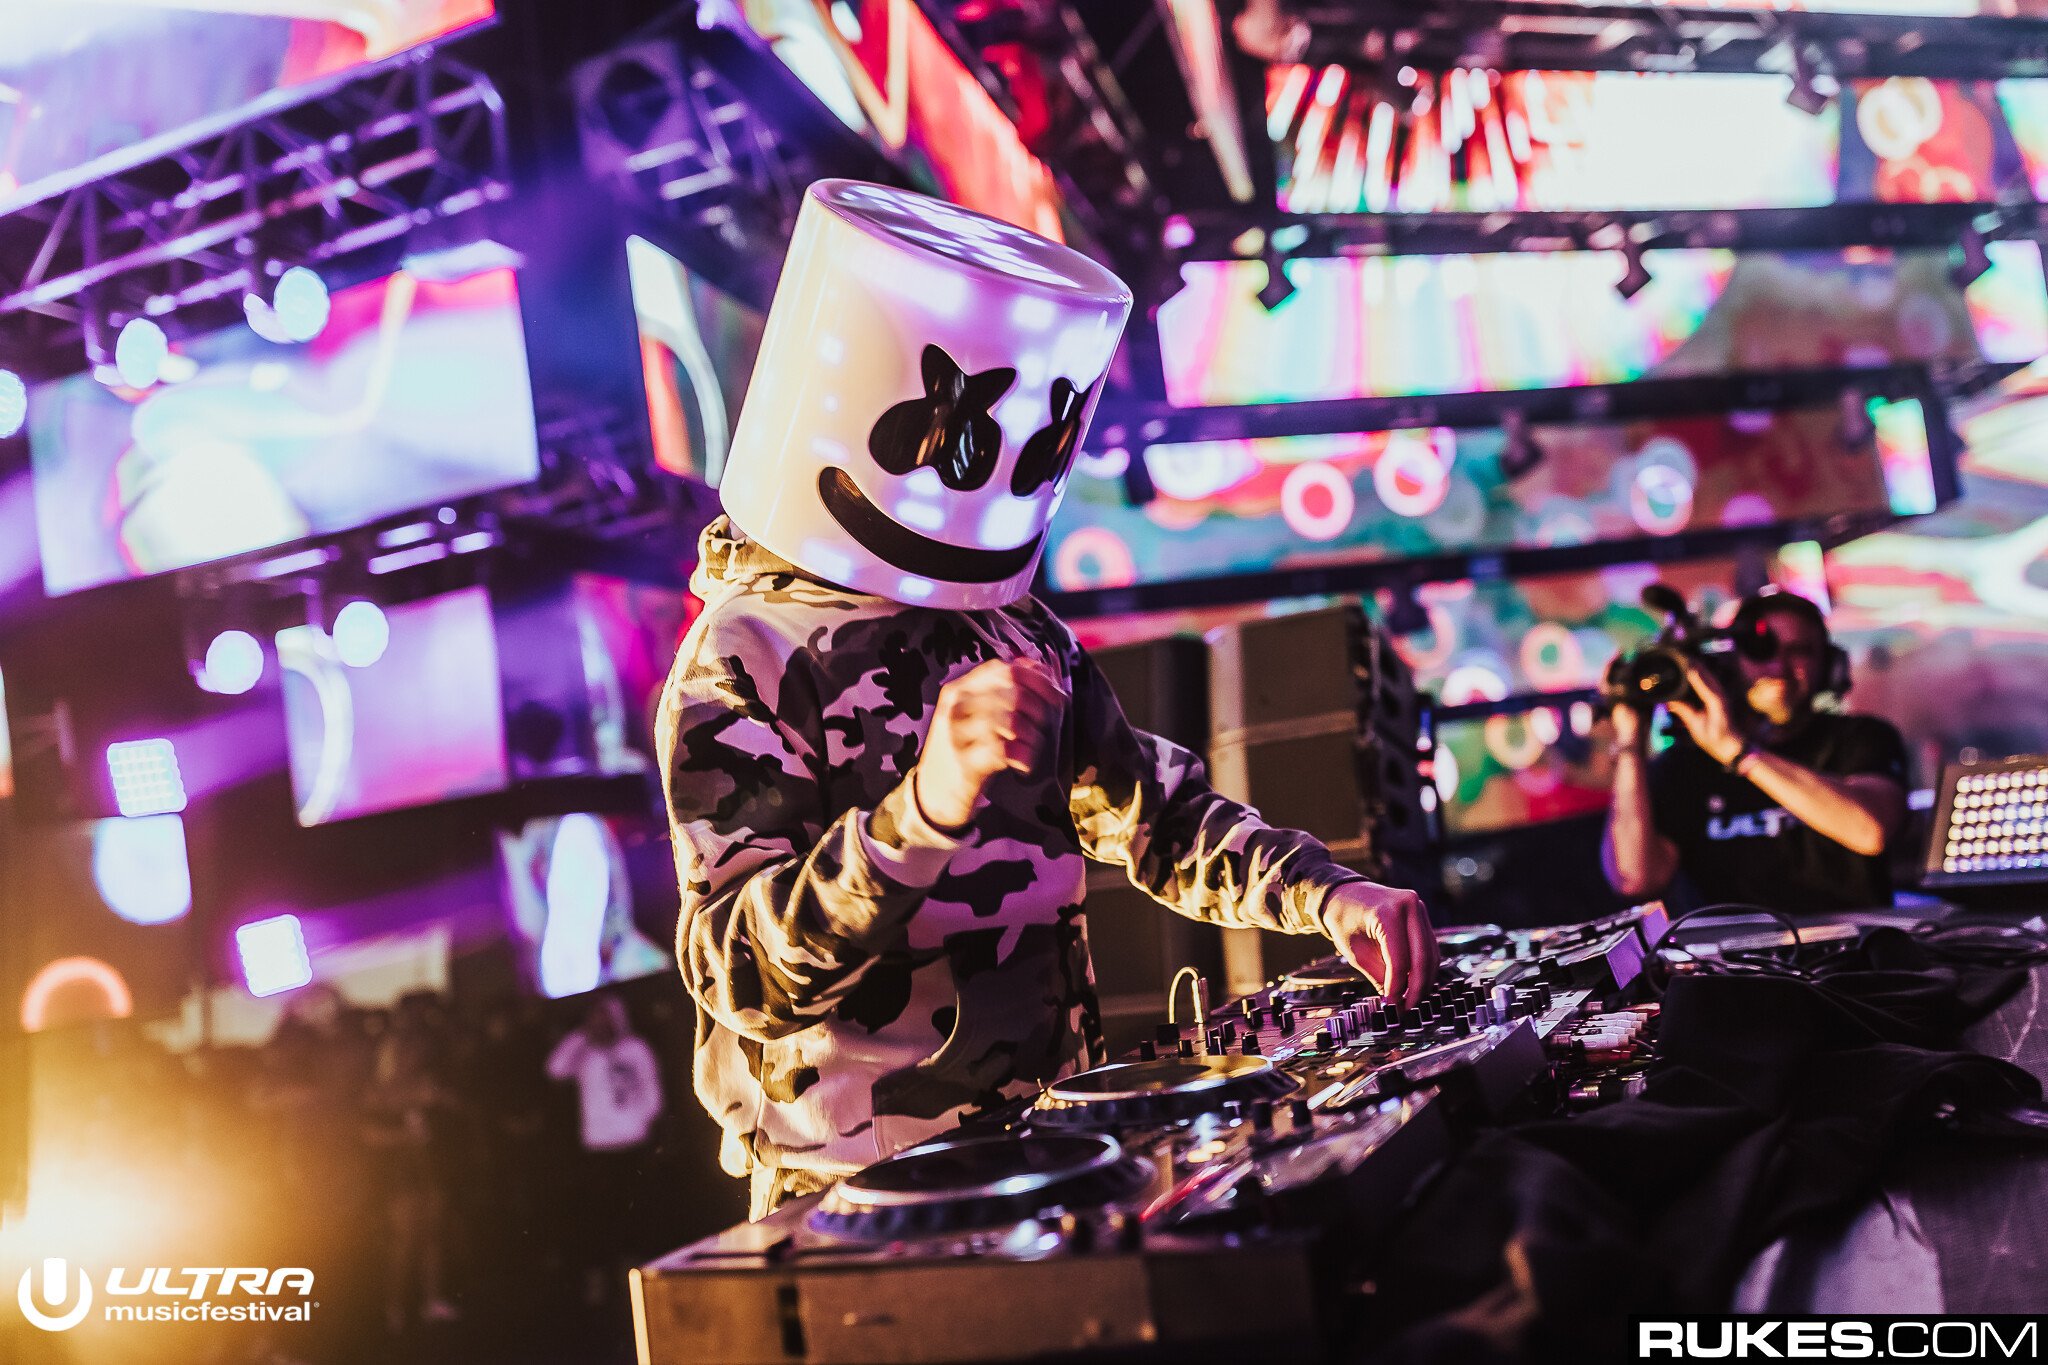 Marshmello Opens His Lollapalooza Set With New Ray Volpe Collab [WATCH]